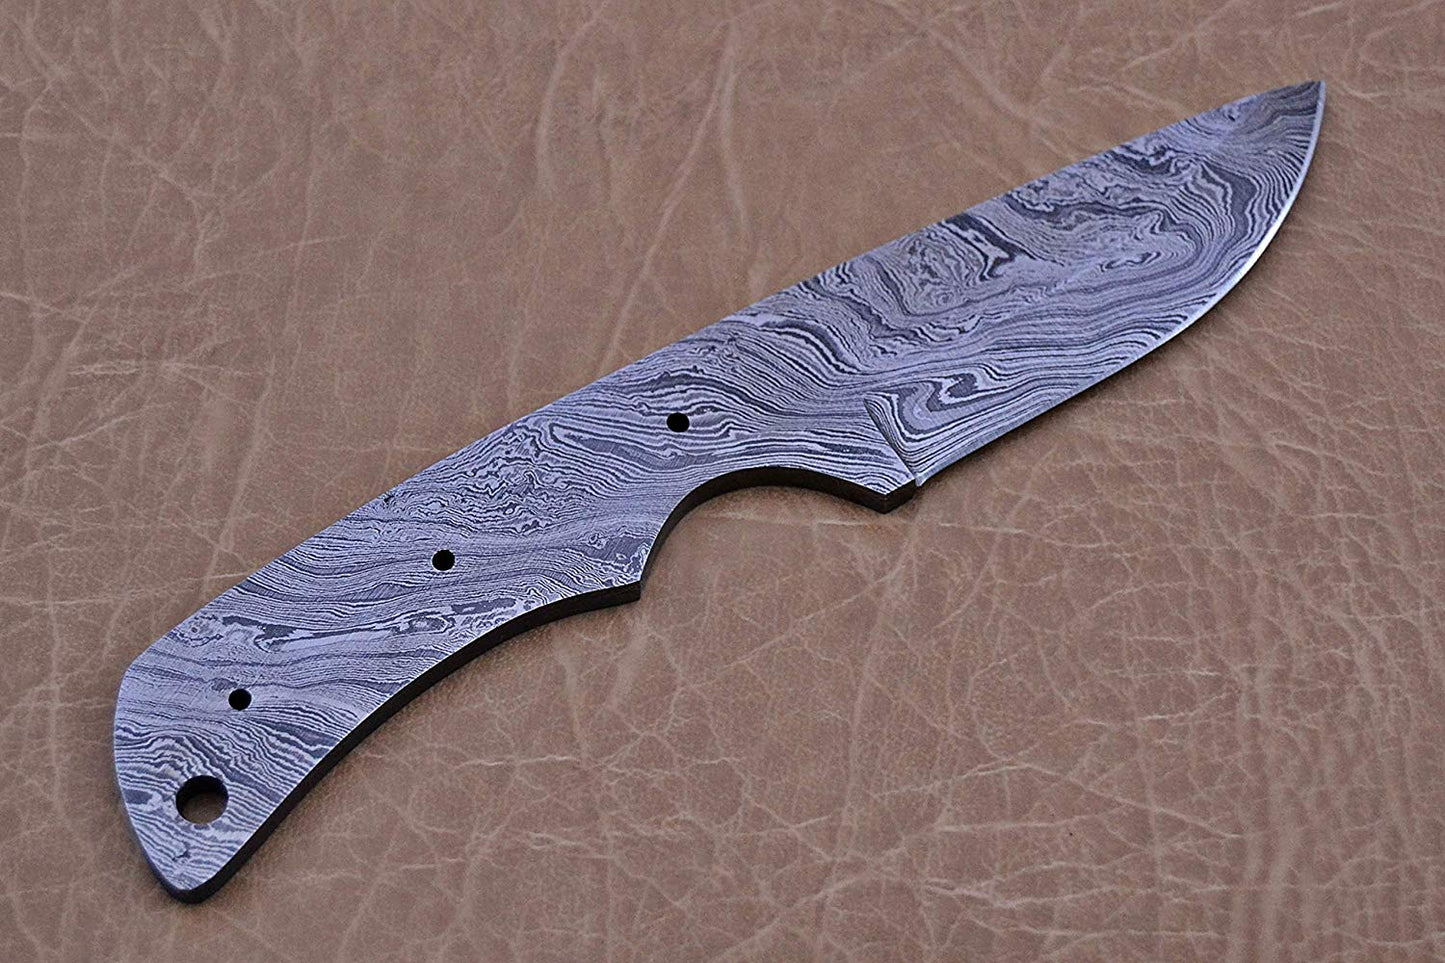 8 inches Long Blank Blade, Knife Making Supplies, Damascus Steel Blank Blade Hand Forged Skinning Knife with 3 Pins & an Inserting Hole Space 4" Long Blade with 4" Scale